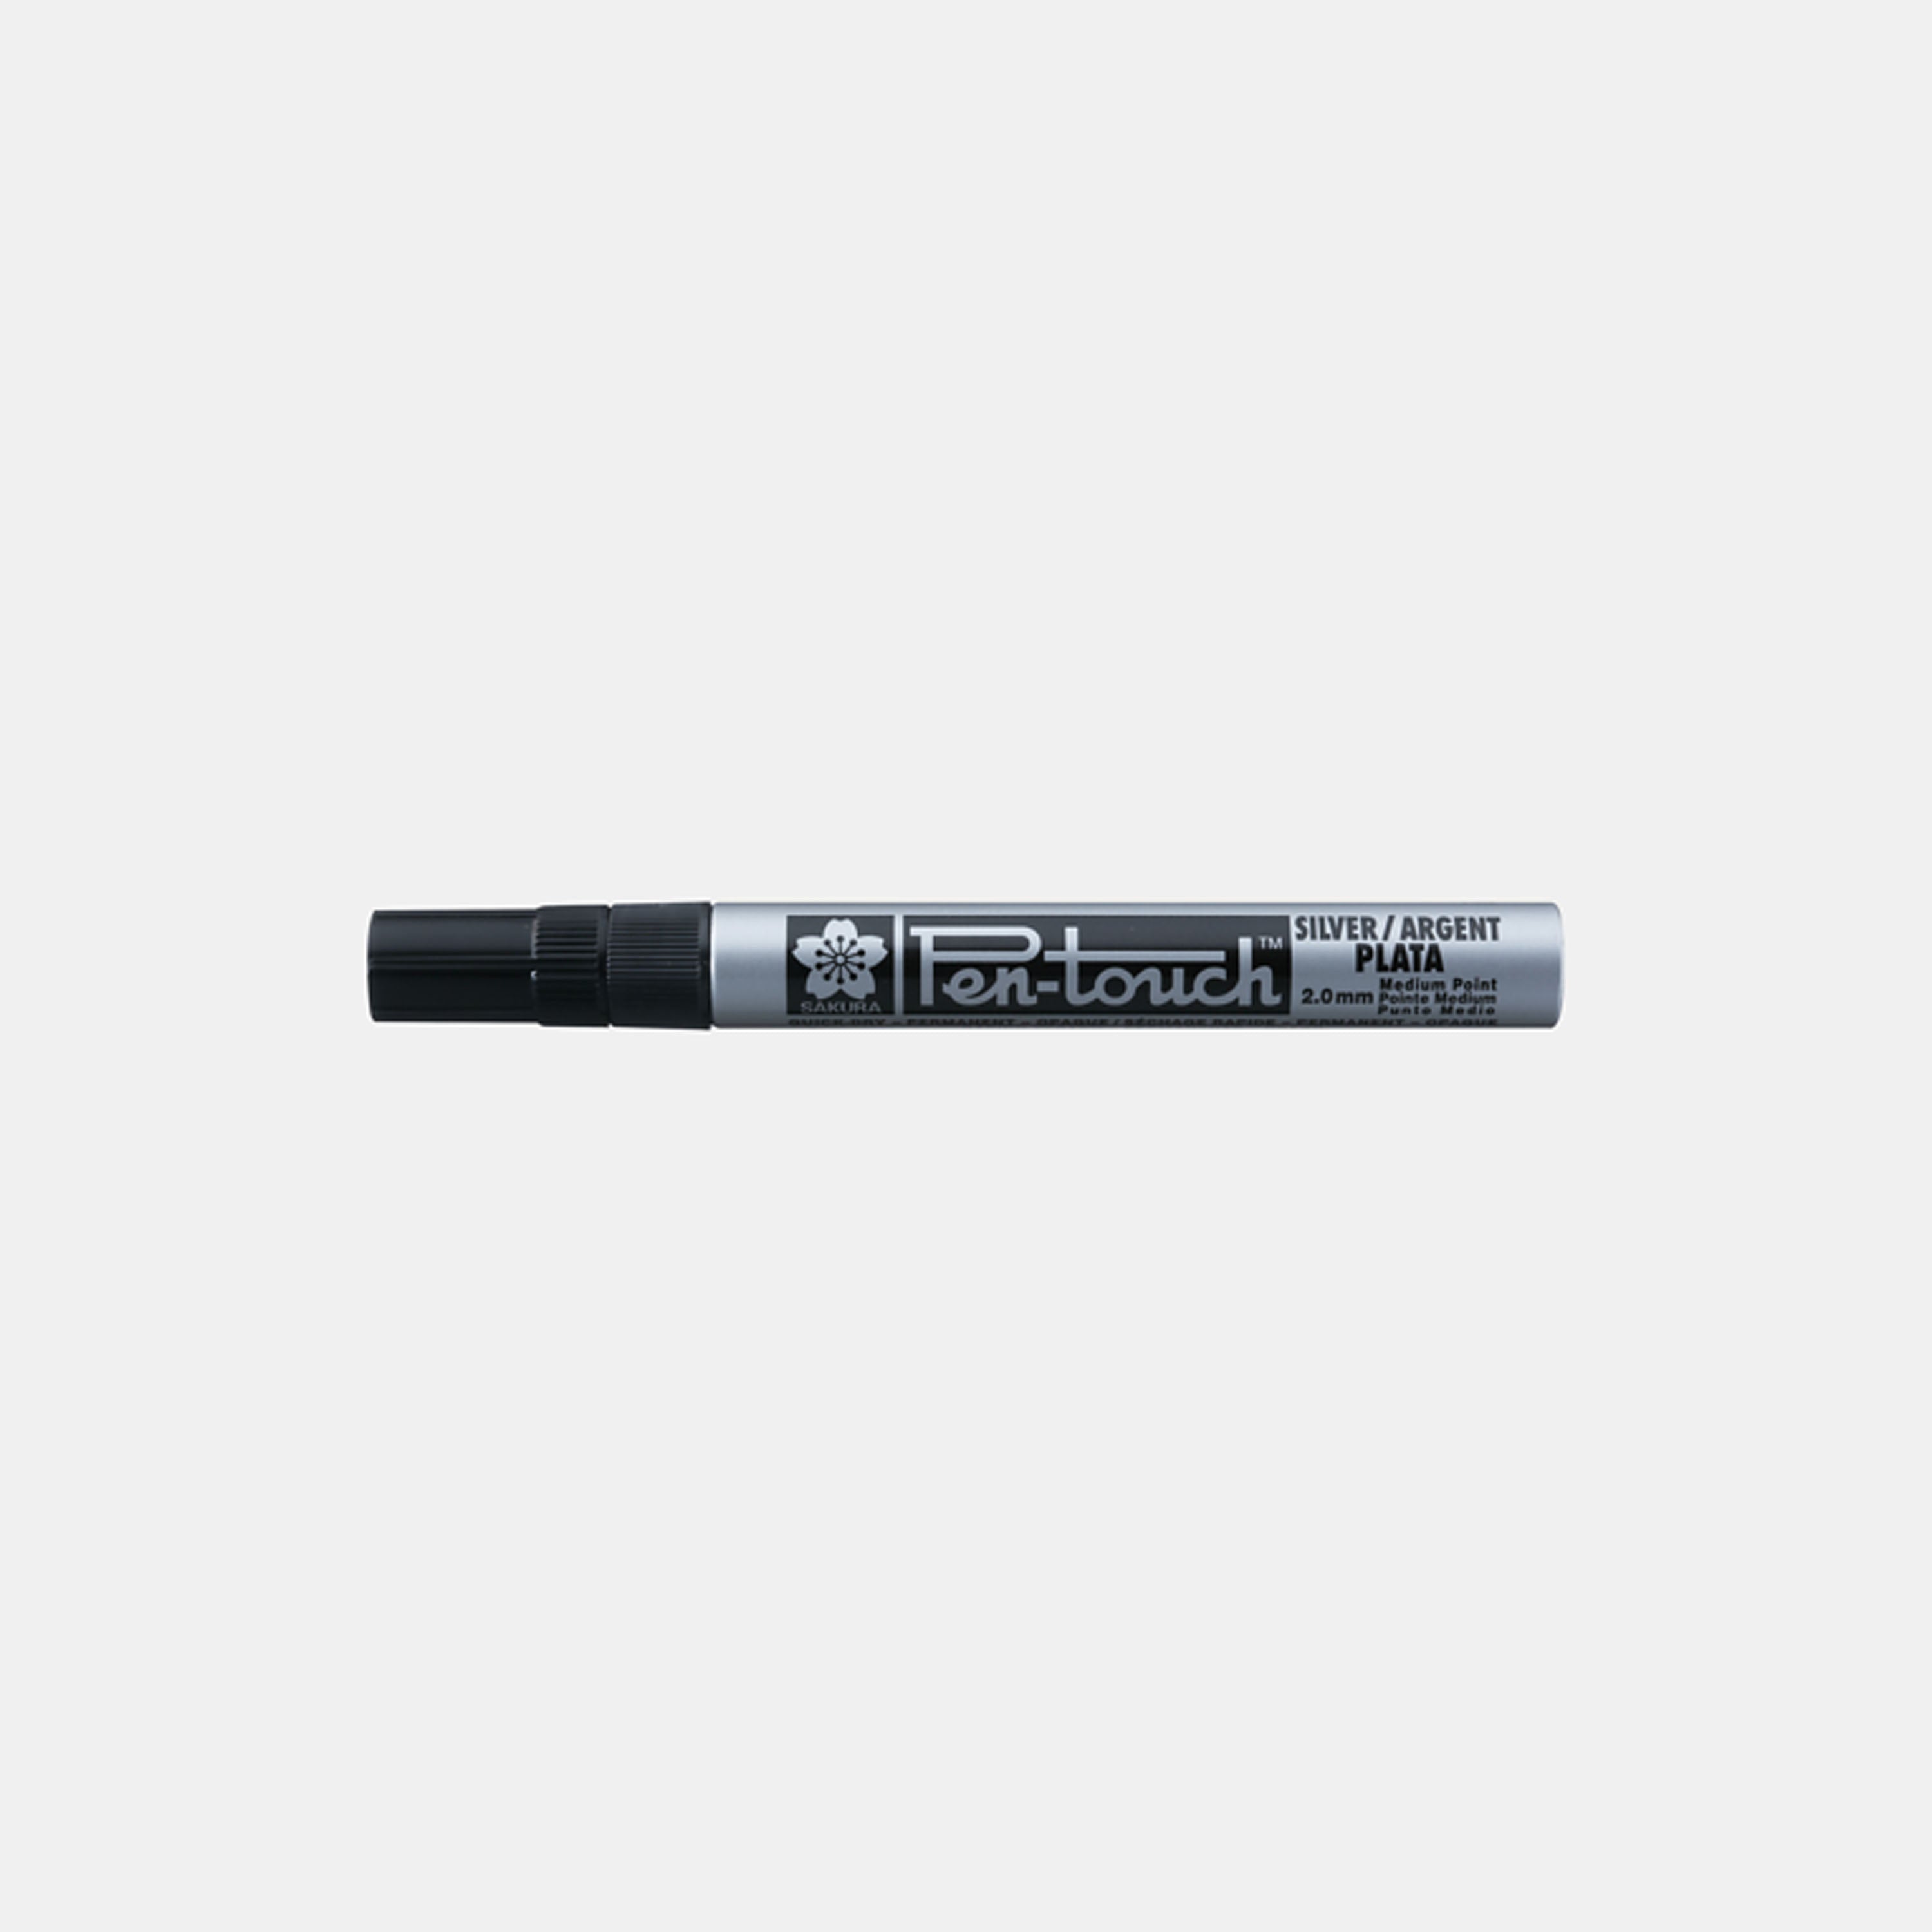 PEN TOUCH 2.0 -PERMANENTTI TUSSI 2MM